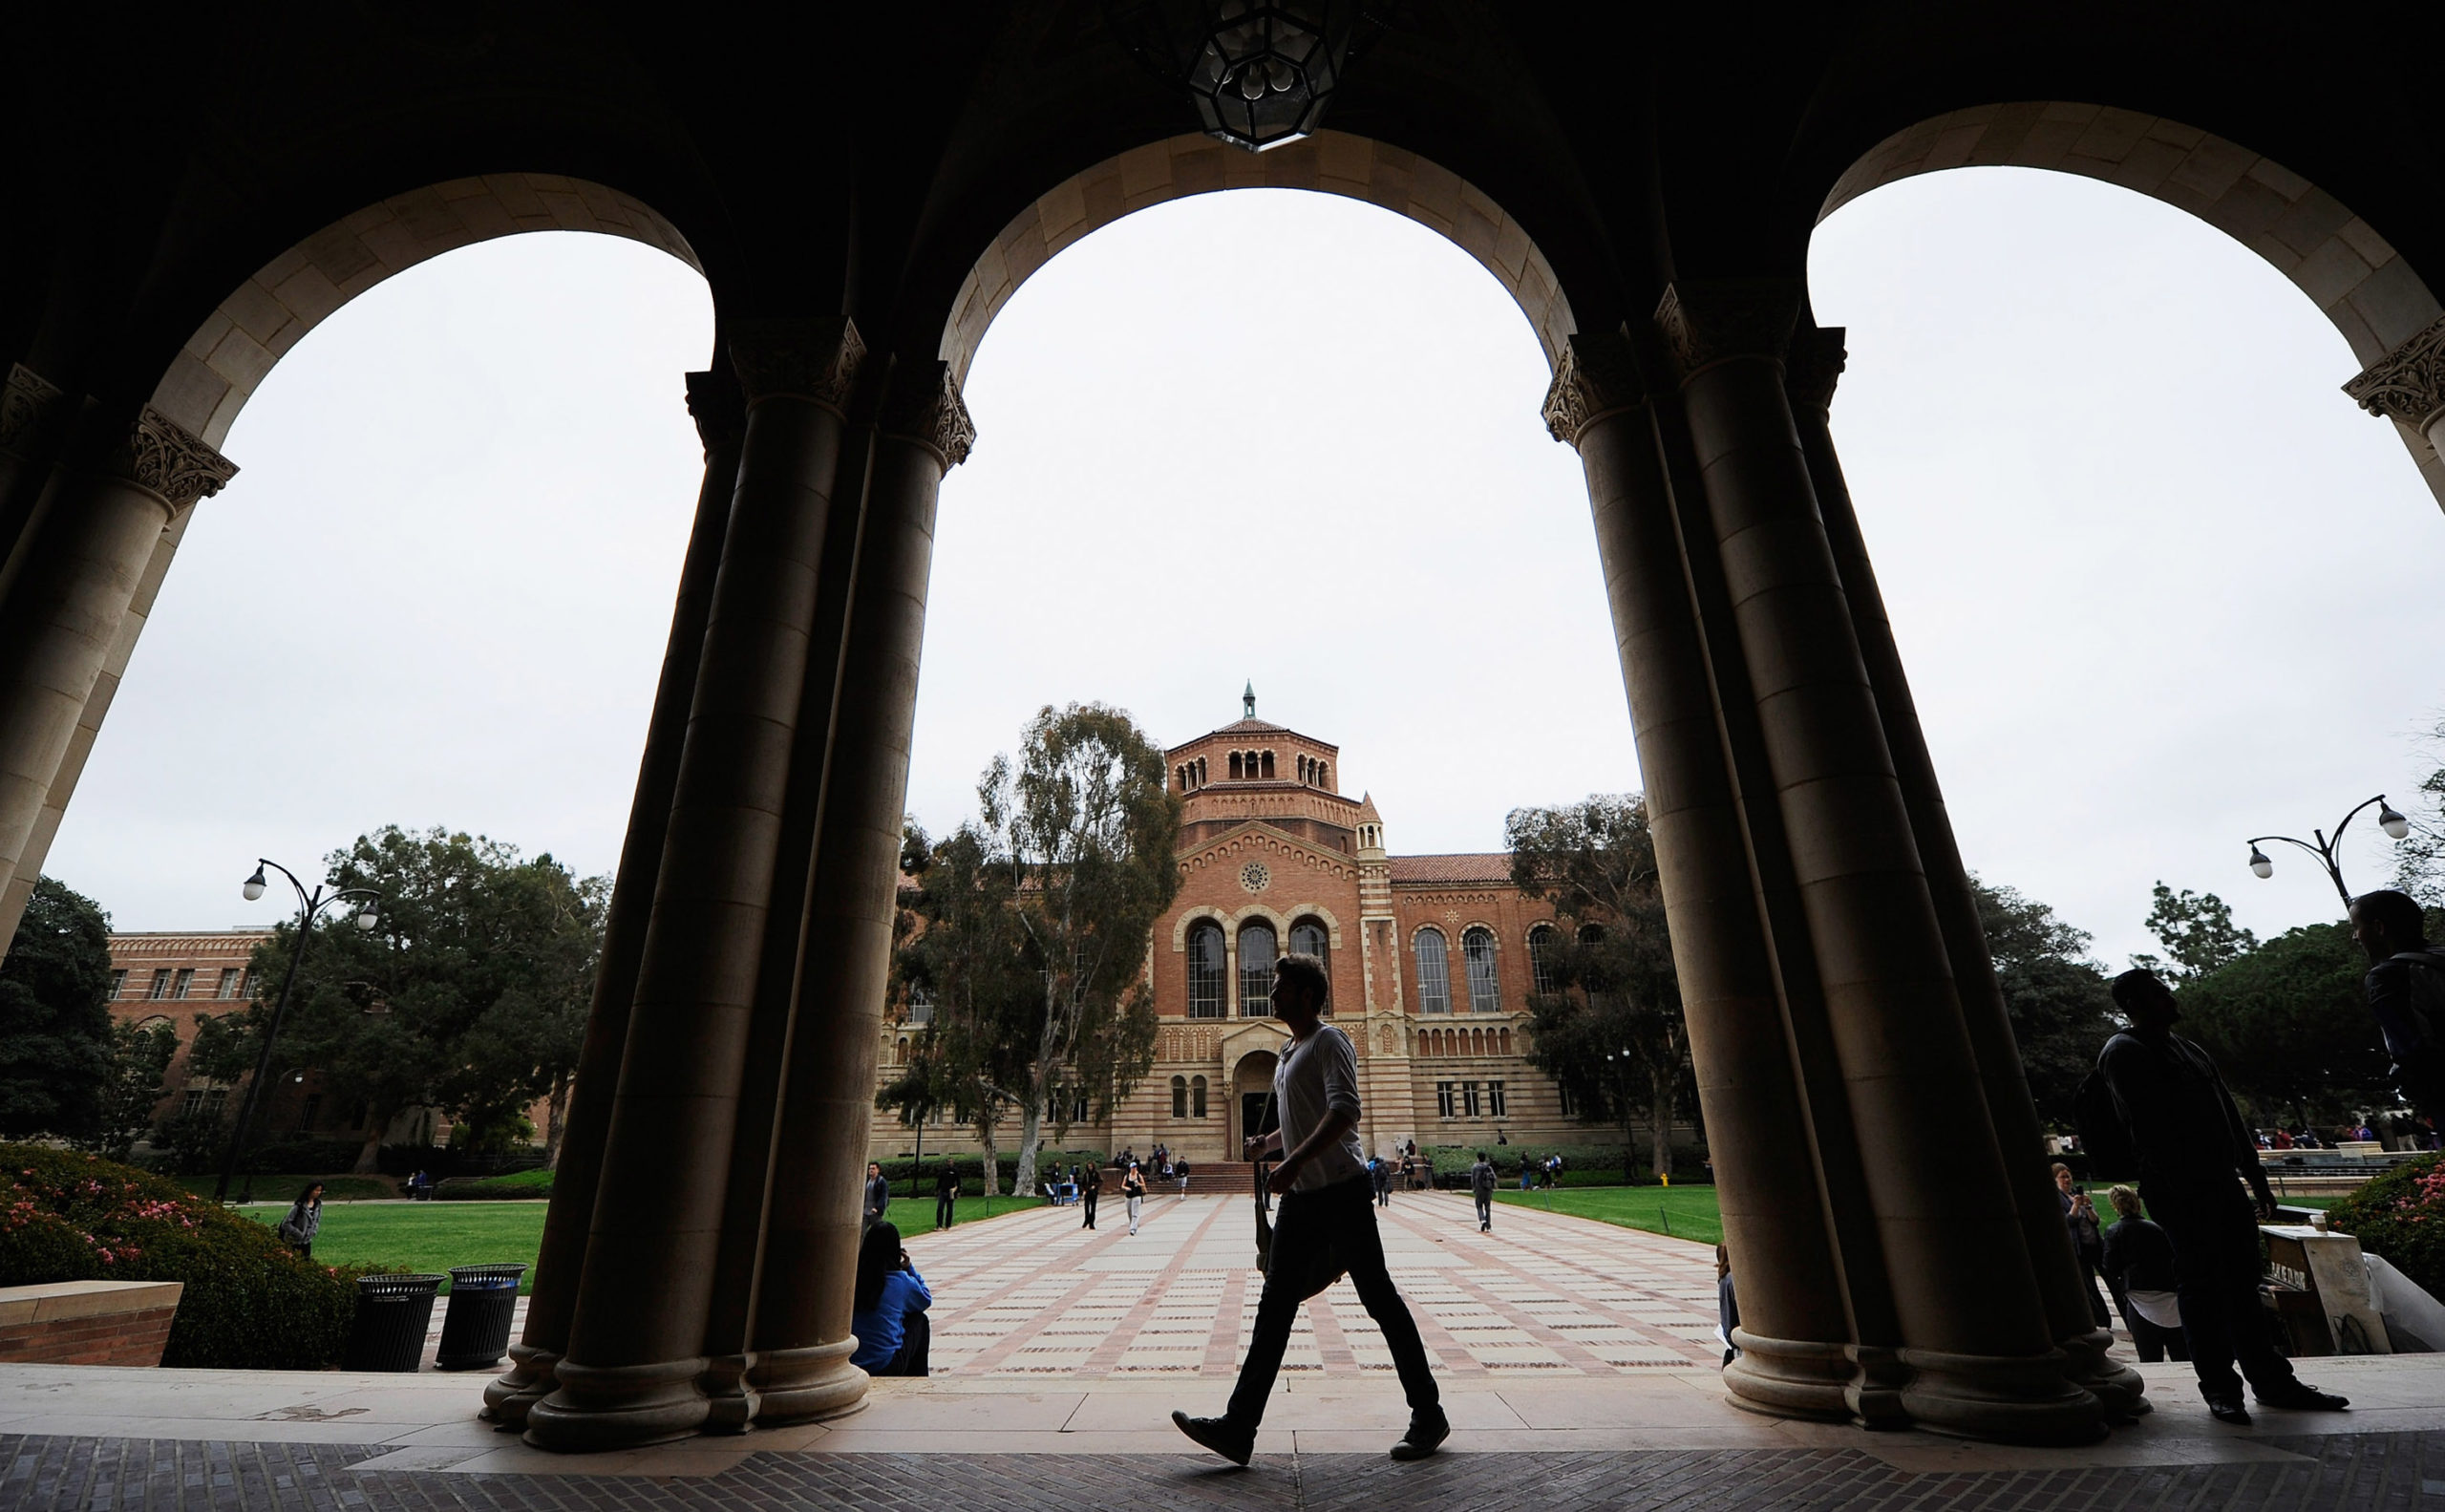 A student walks near Royce Hall on the campus of UCLA on April 23, 2012 in Los Angeles, California. According to reports, half of recent college graduates with bachelor's degrees are finding themselves underemployed or jobless. (Photo by Kevork Djansezian/Getty Images)